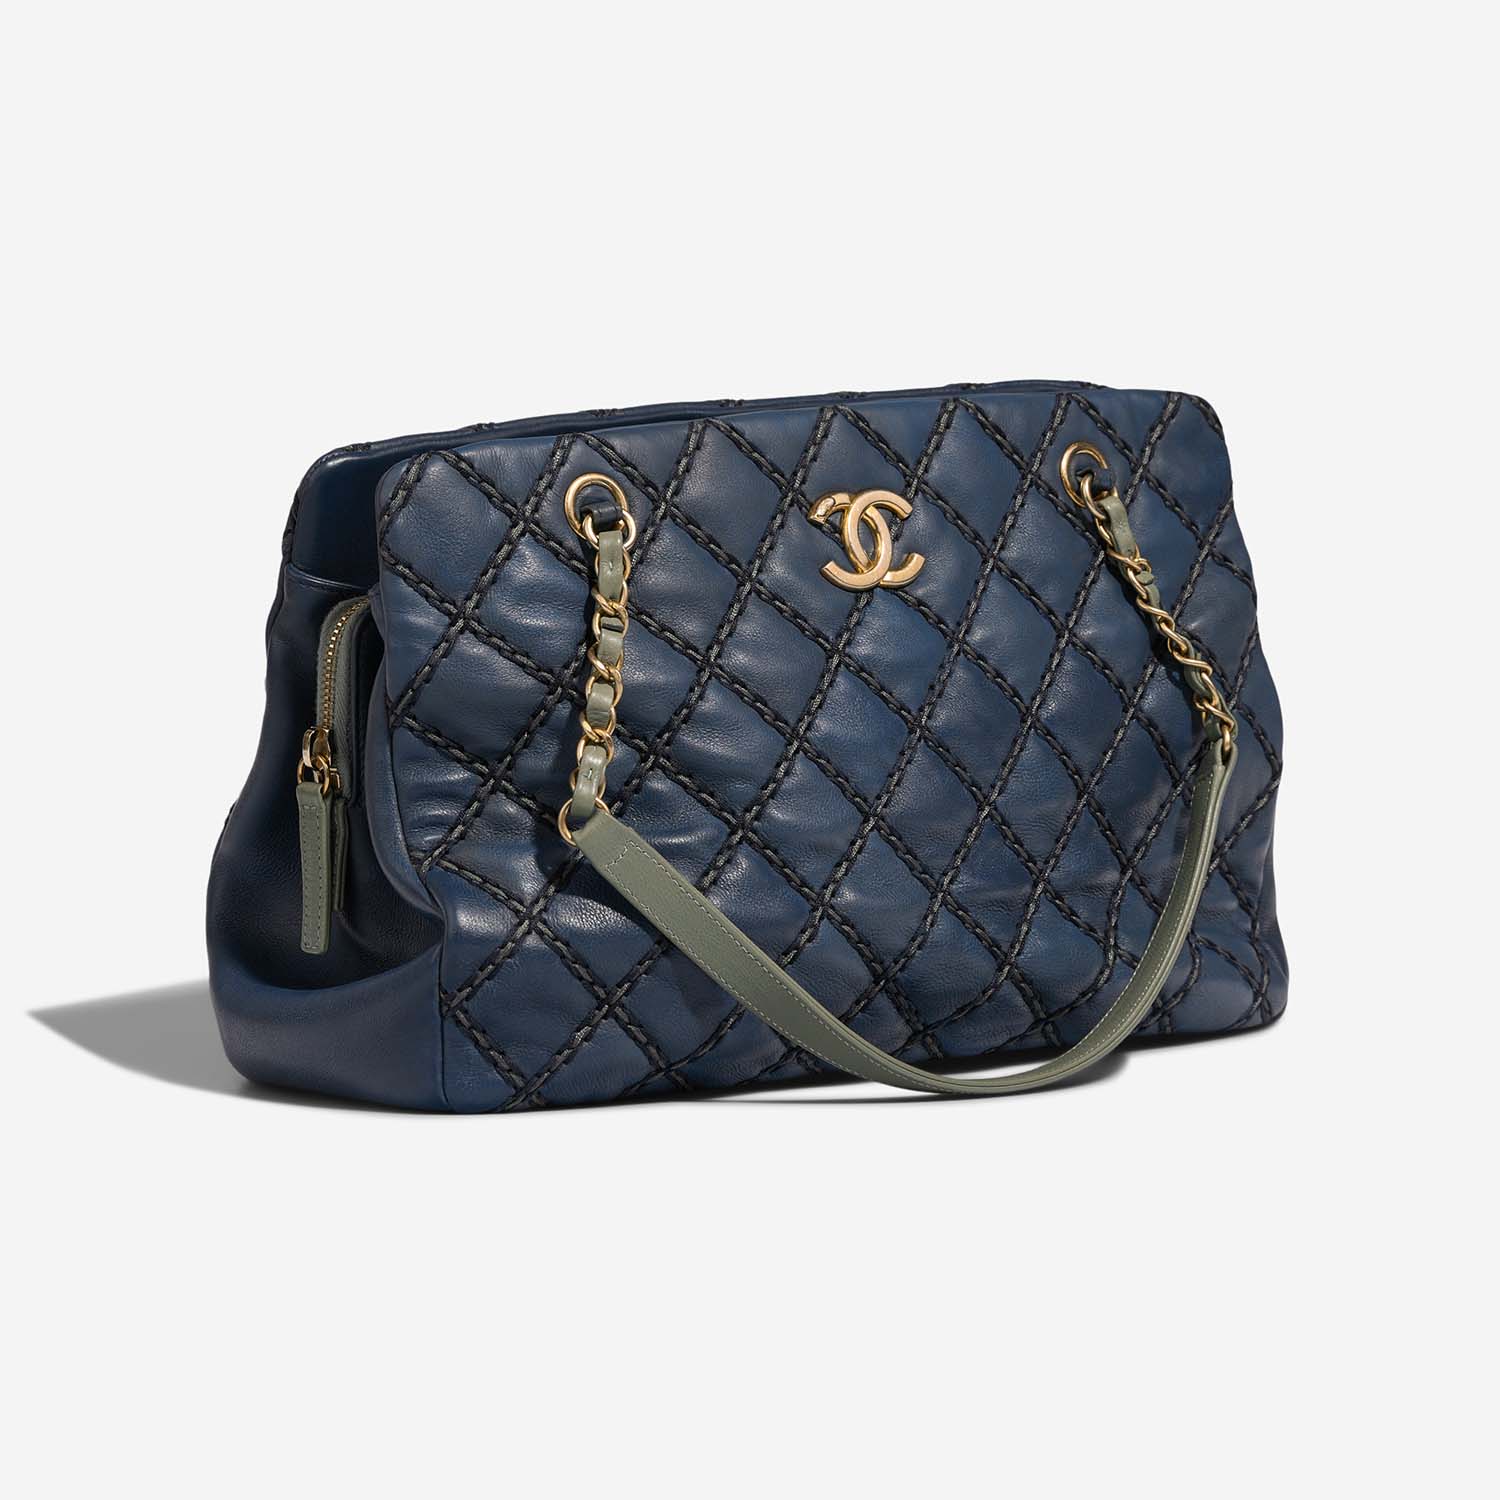 Chanel Shopping Tote Navy Side Front  | Sell your designer bag on Saclab.com